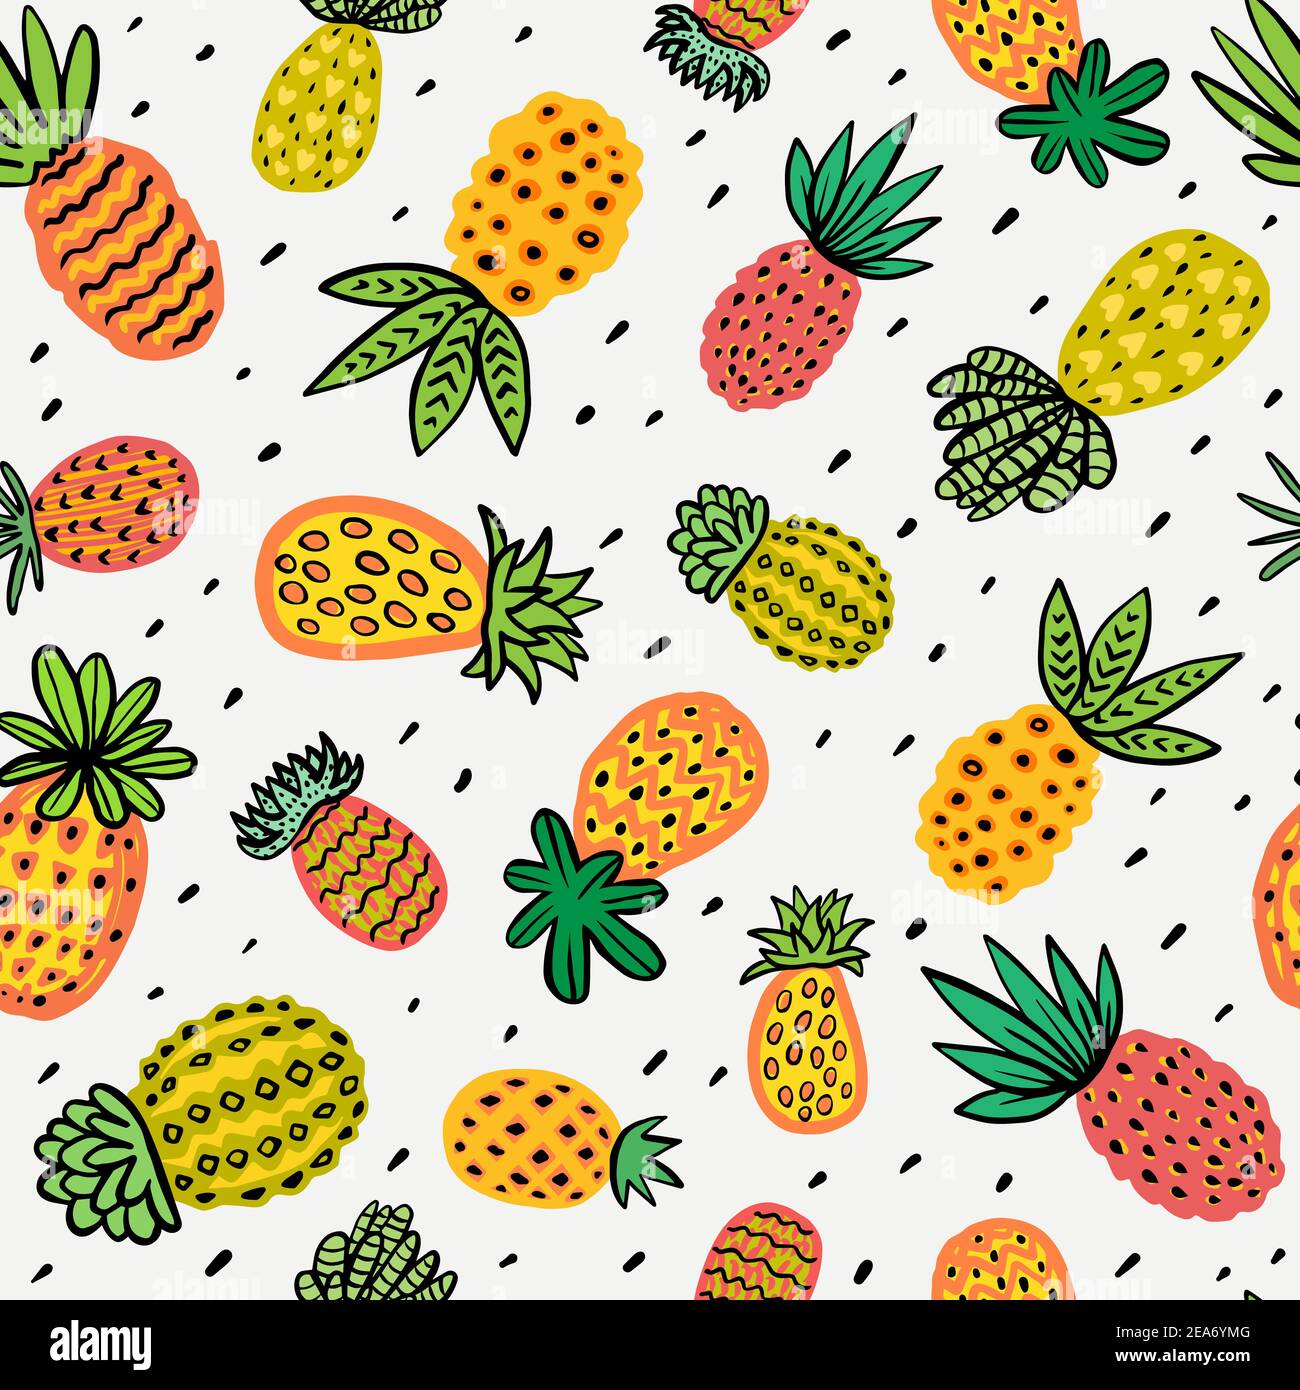 Seamless sunny pineapple pattern. Decorative Pinapple with different textures in warm colors. Exotic fruits background For Fashion print textile Stock Vector